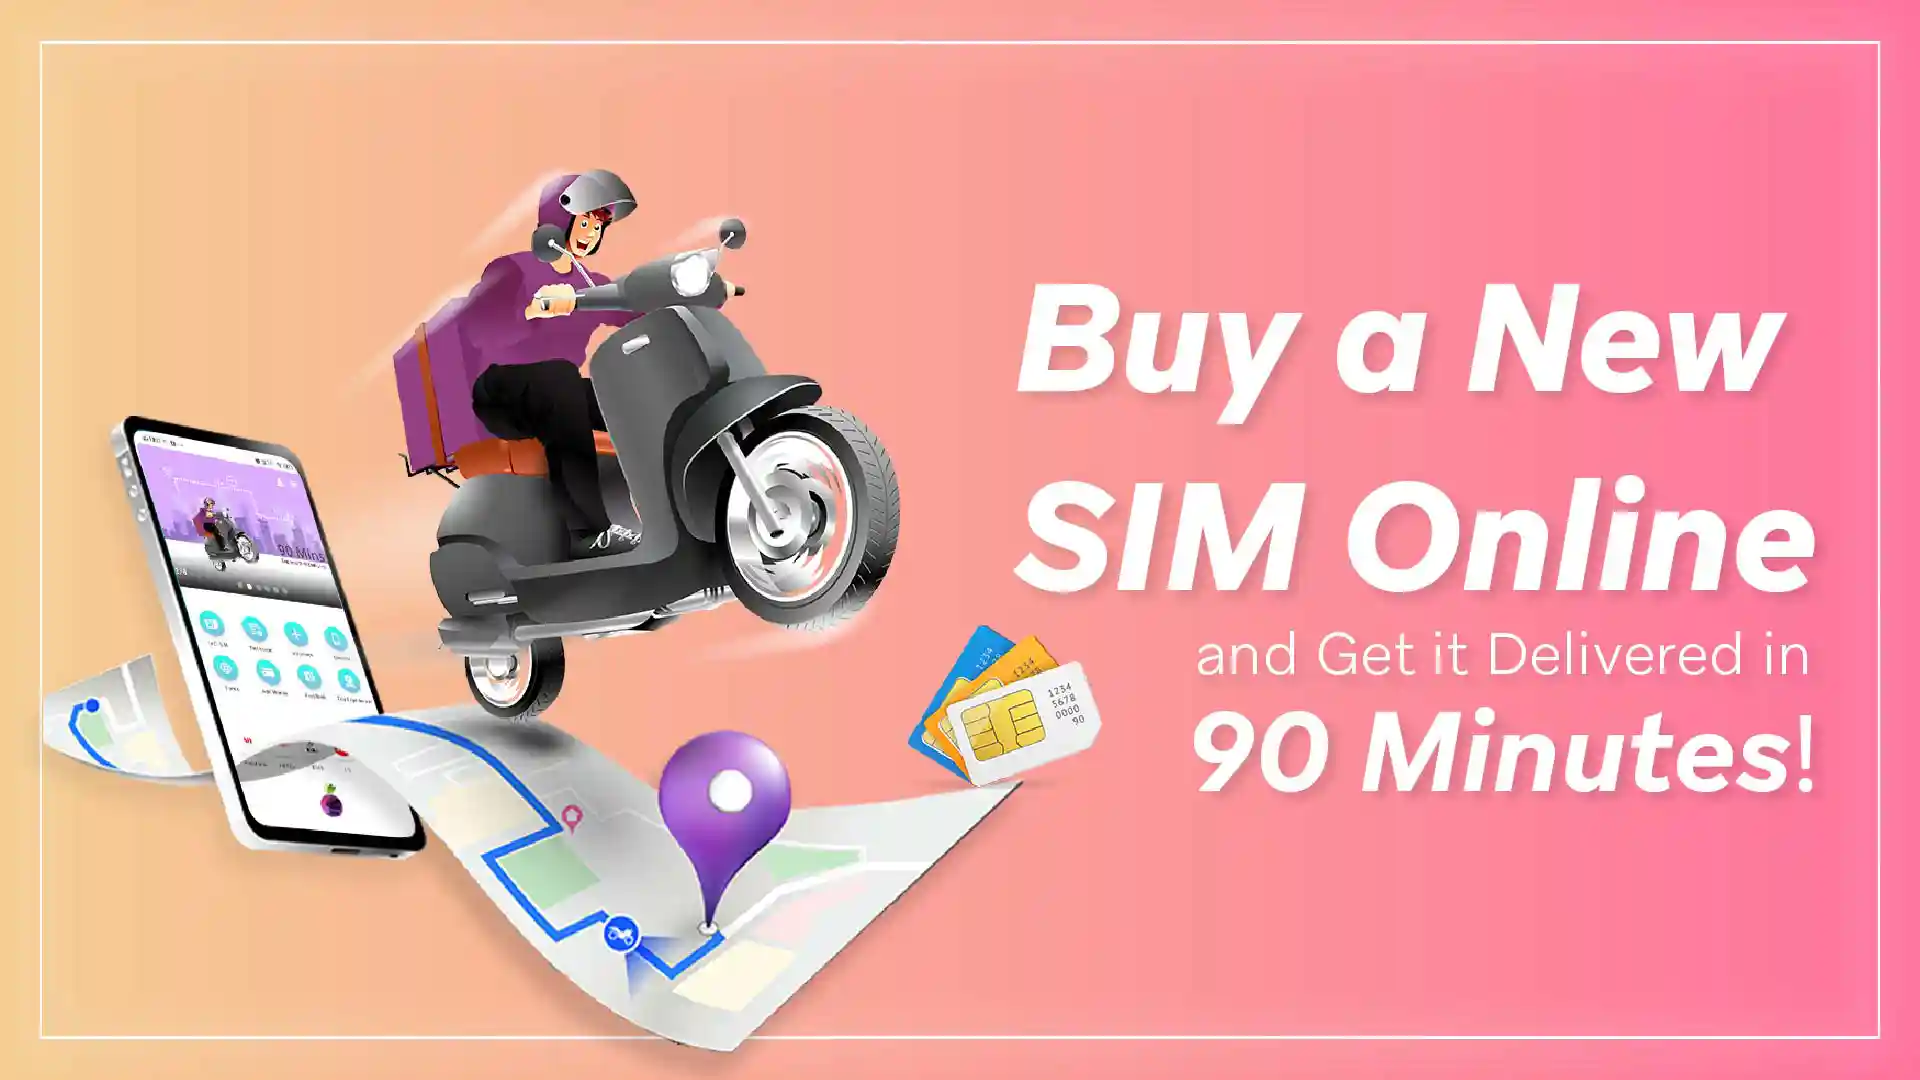 How is Prune's 90-Minute SIM Card Delivery a Game Changer?